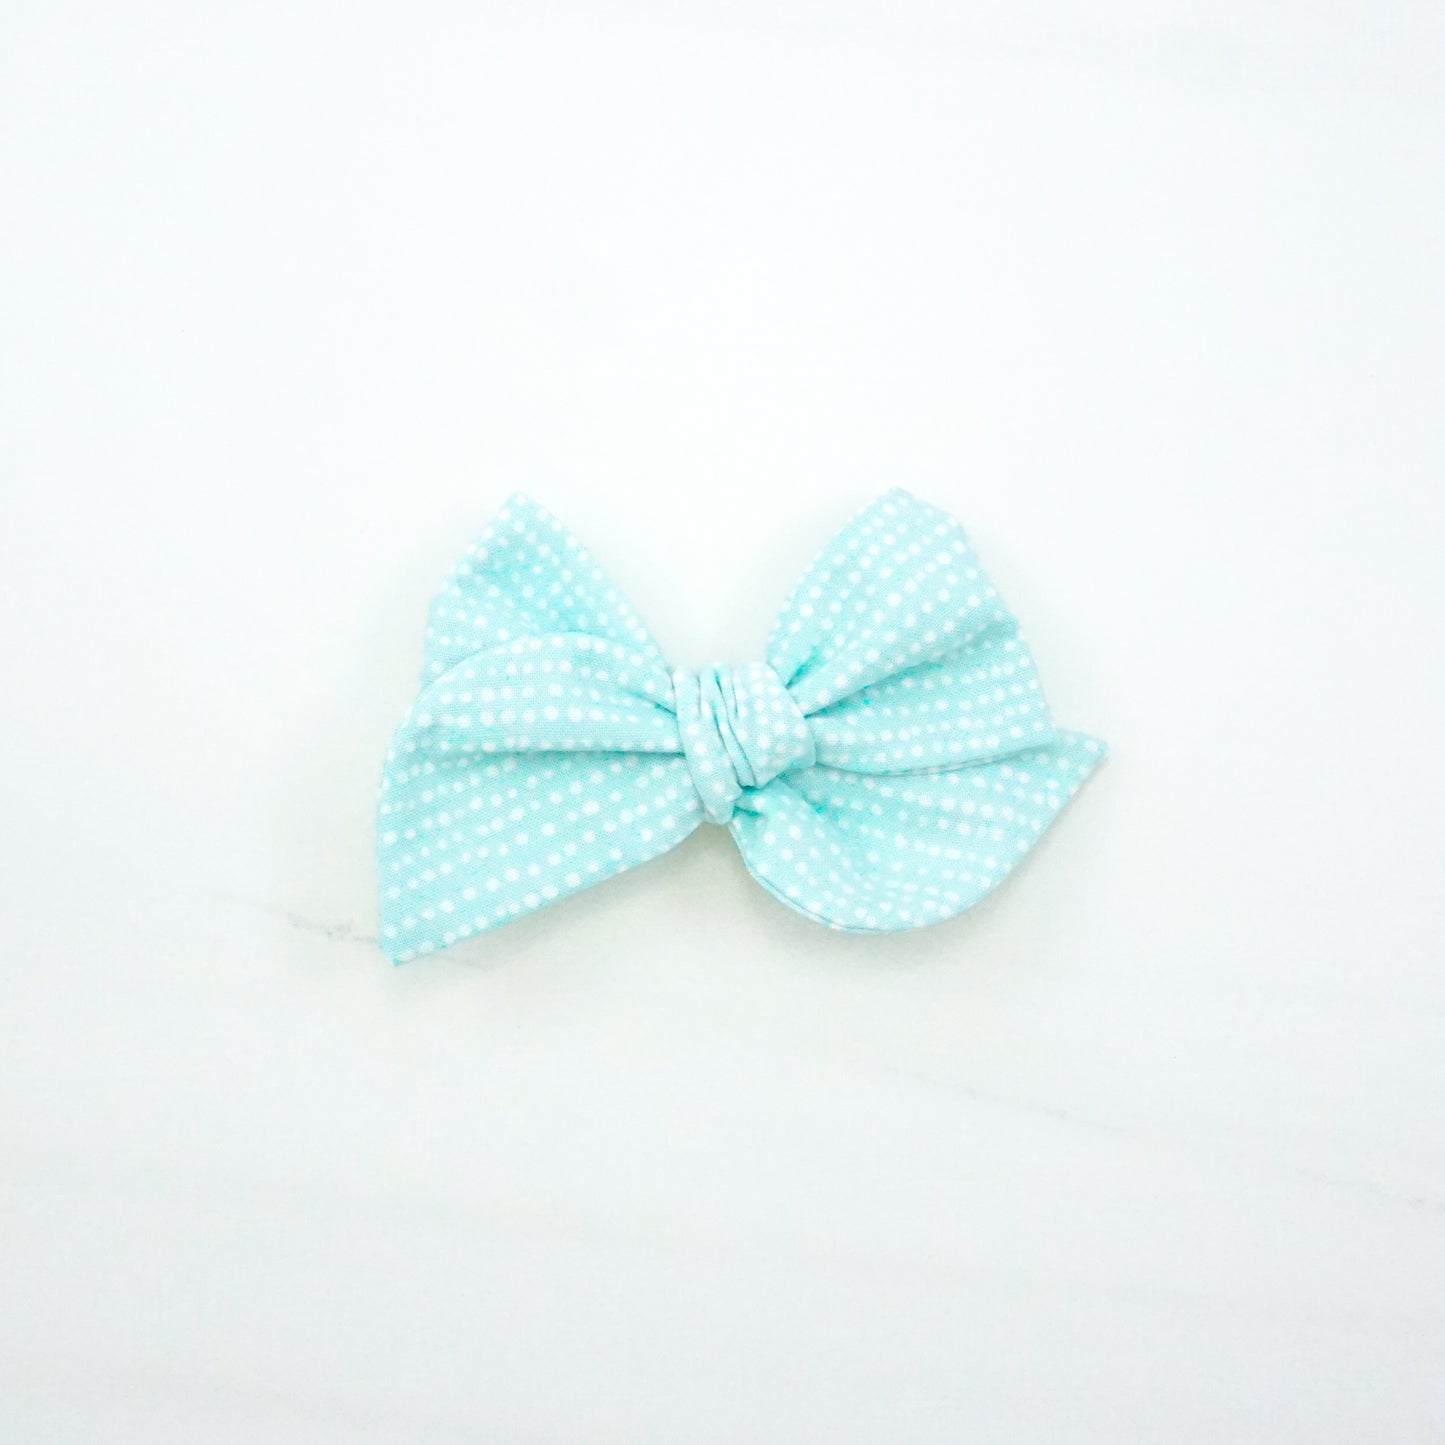 Handtied Fabric Bow - Ready to Ship (clip attached, see description) - Mint Green Snowfall